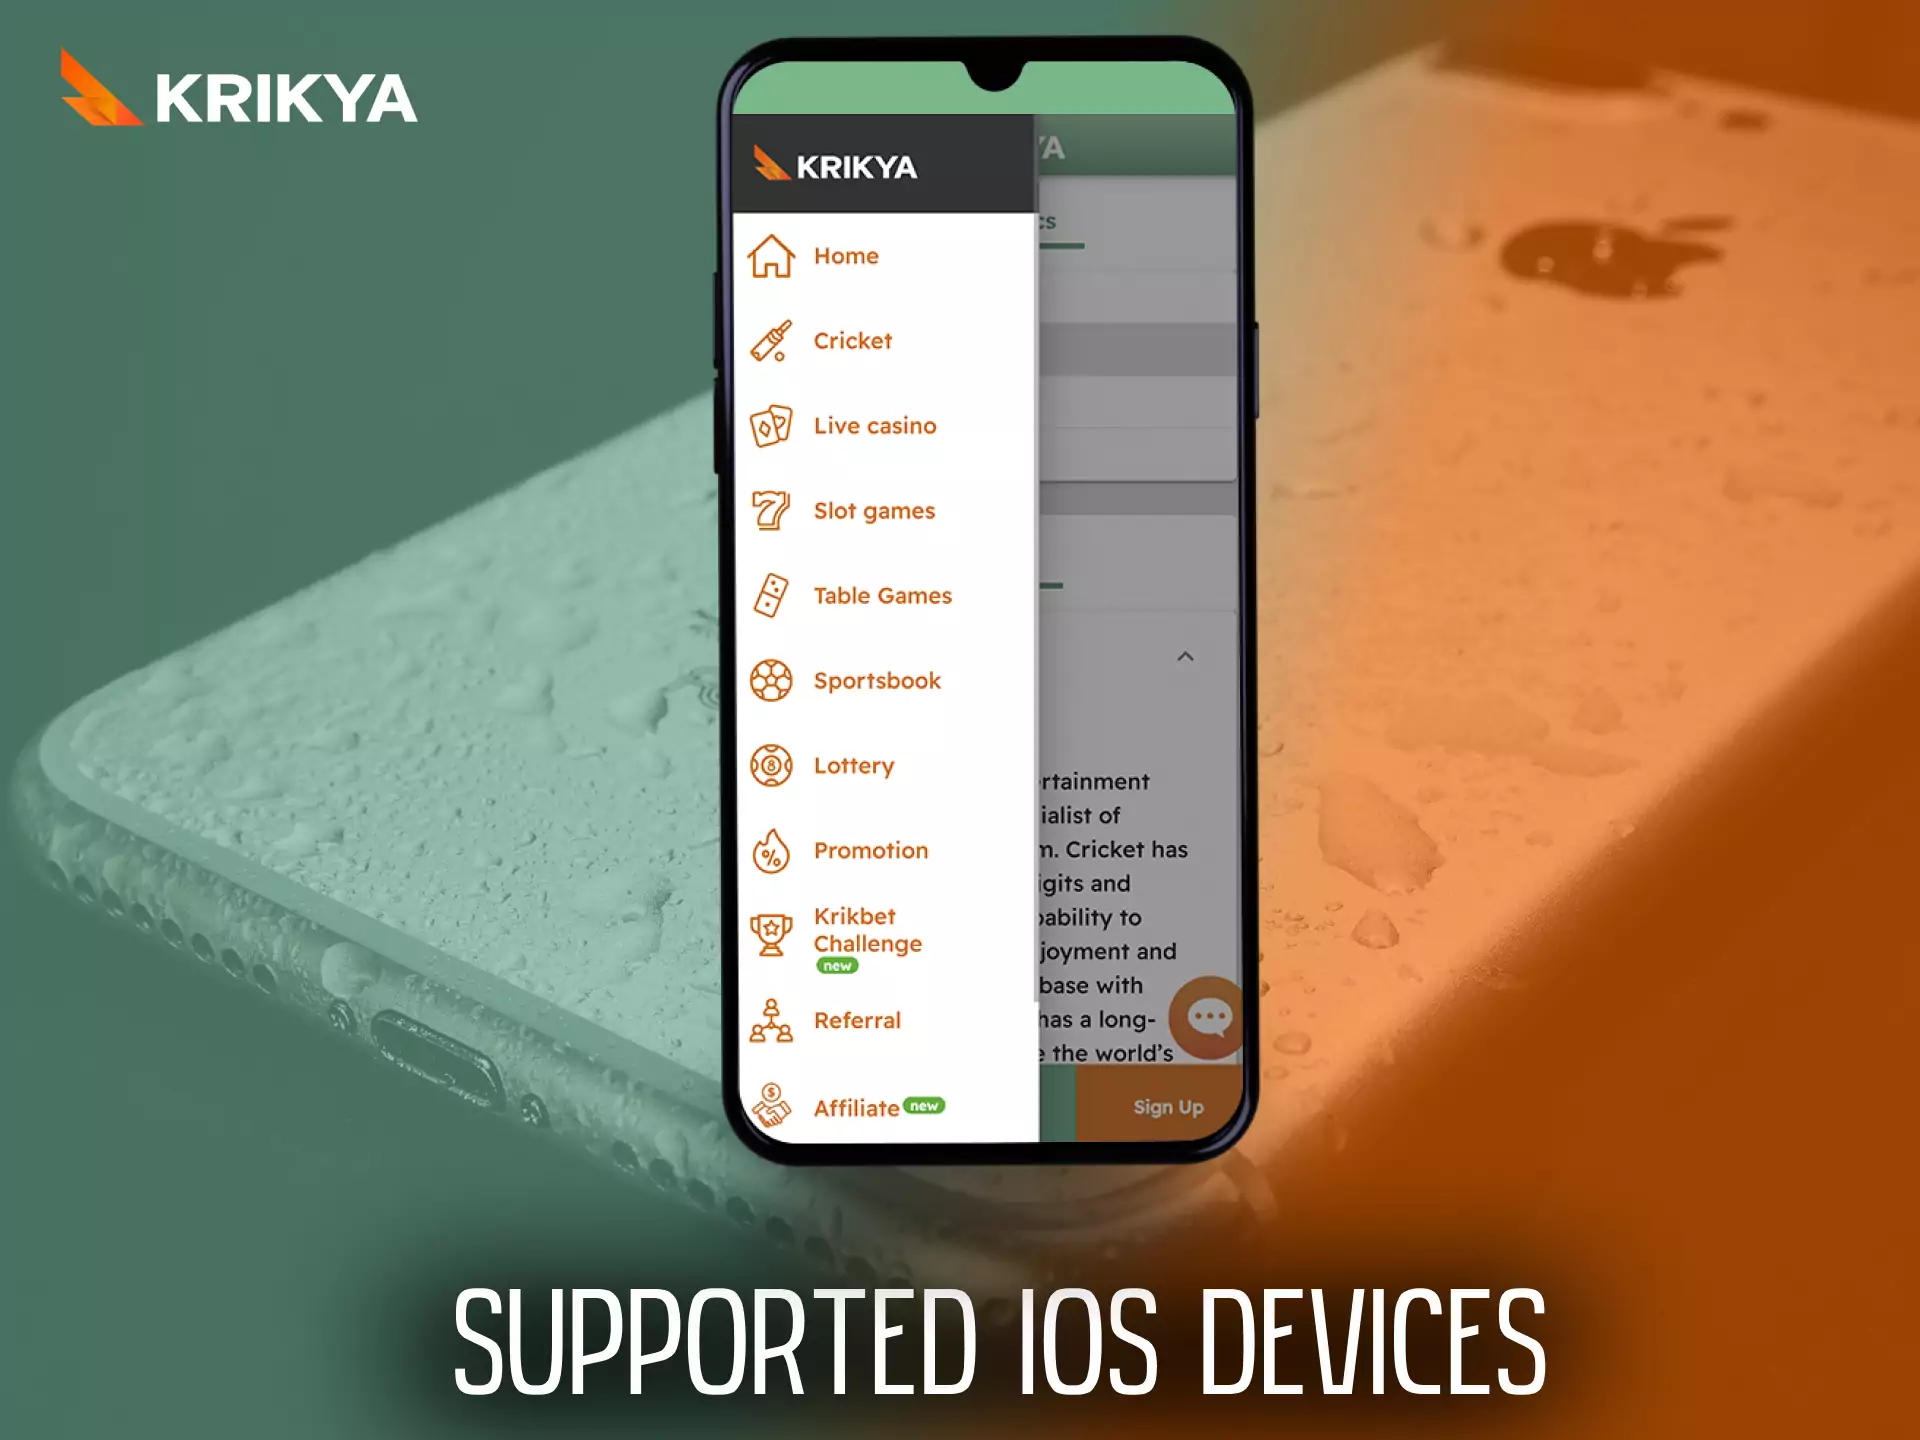 The Krikya app is supported on various iOS devices.